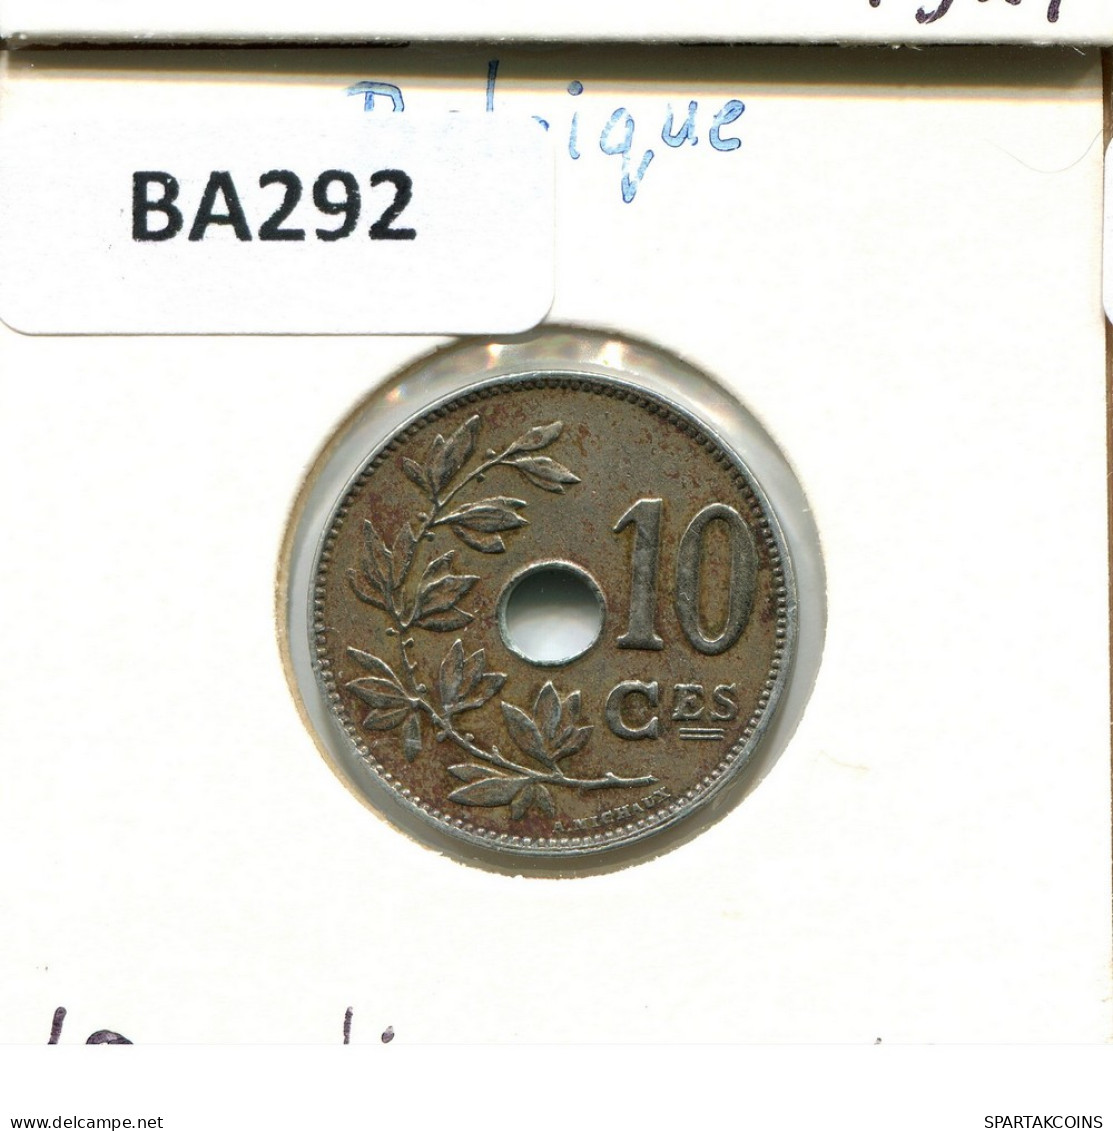 10 CENTIMES 1927 FRENCH Text BELGIUM Coin #BA292.U - 10 Cent